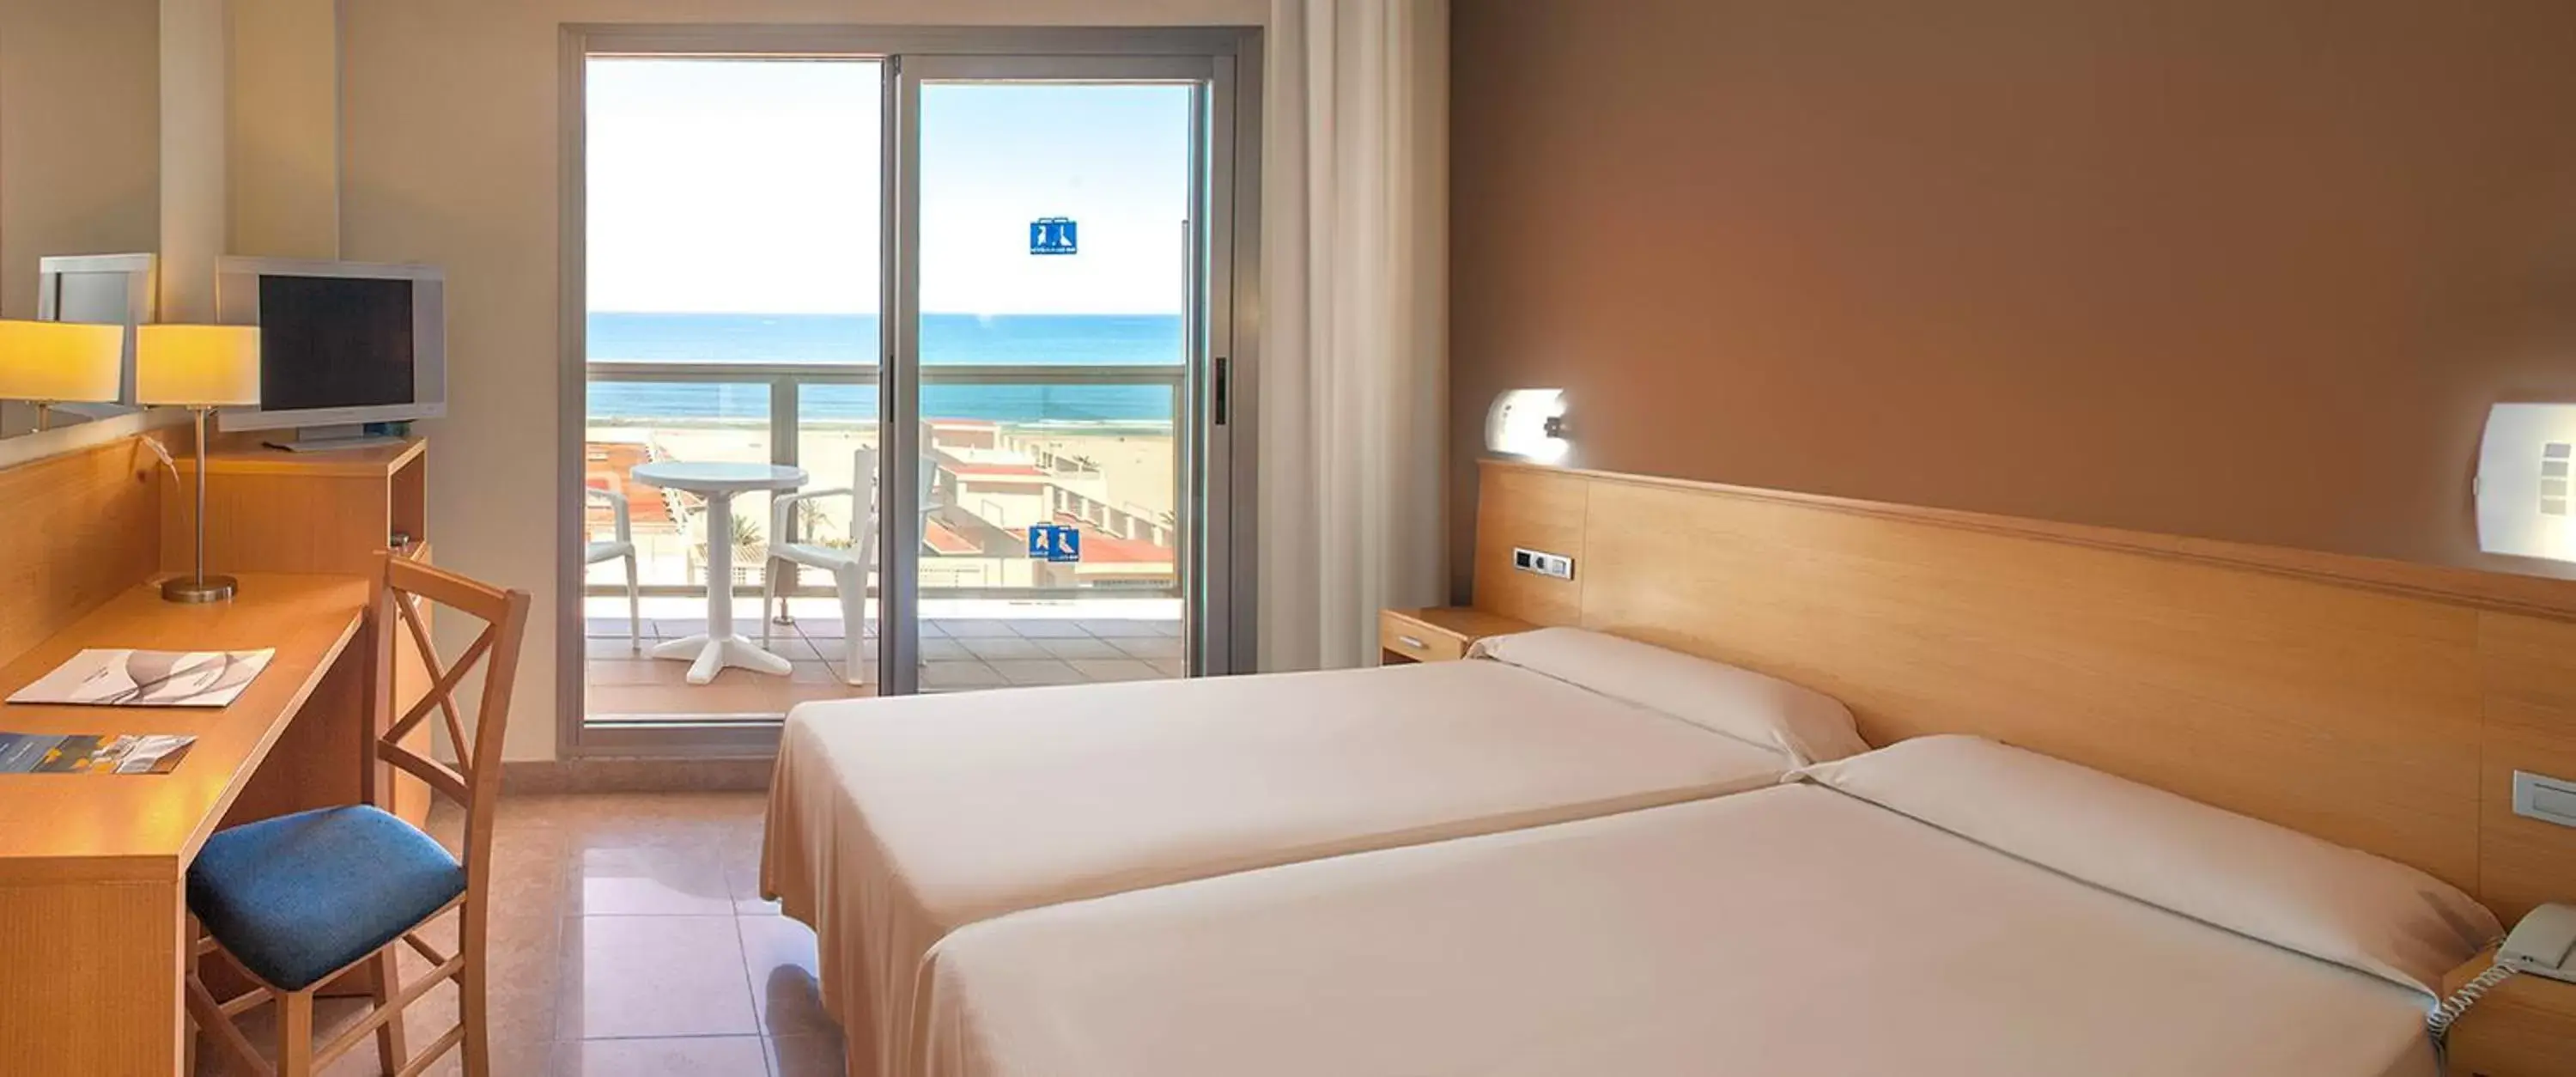 Double Room with Sea View and Terrace in Hotel RH Gijón & Spa